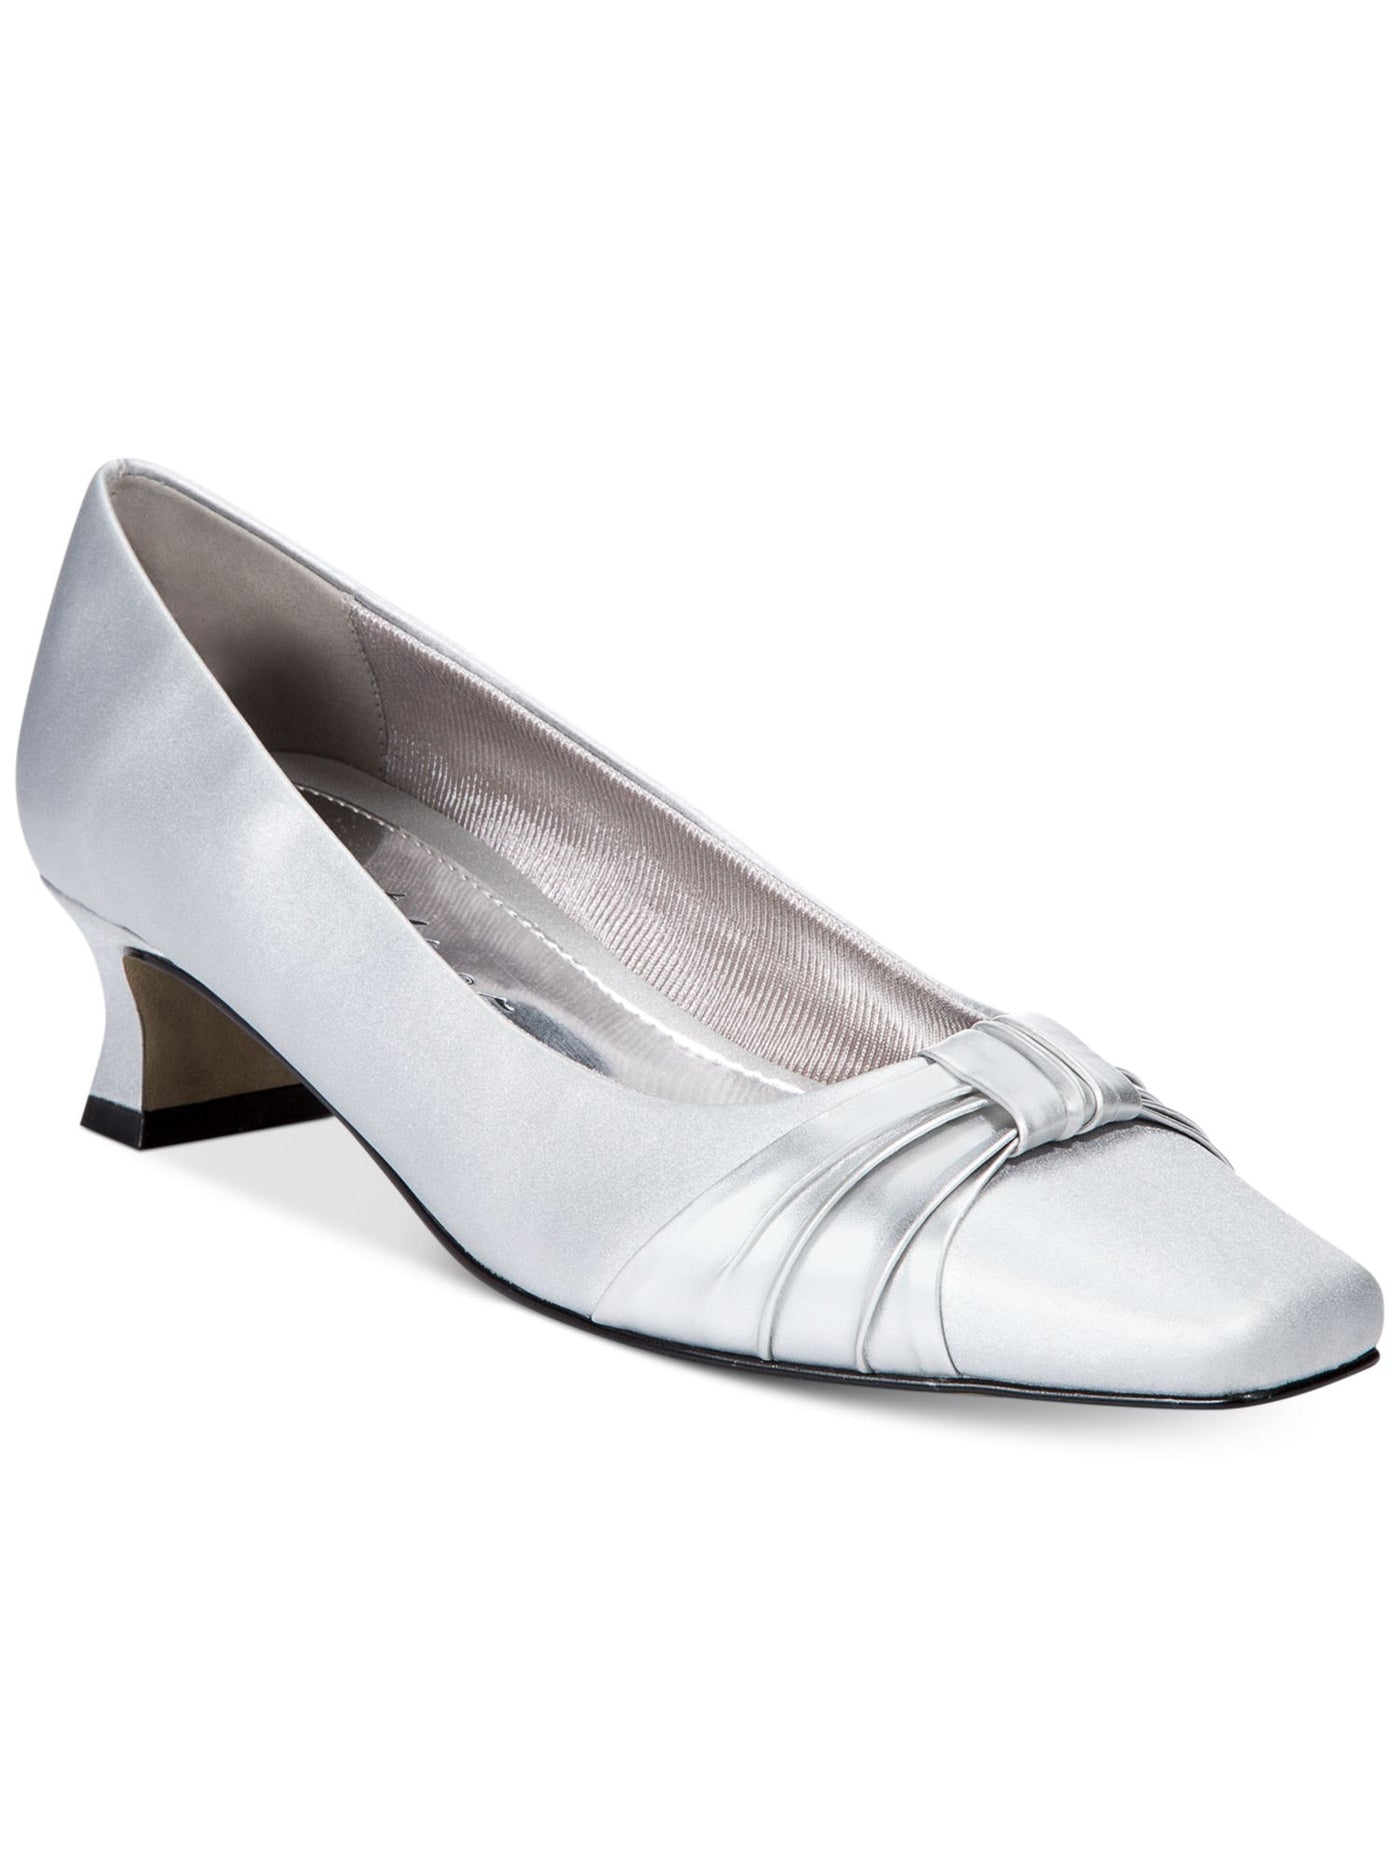 EASY STREET ALIVE AT 5 Womens Silver Bow Accent Padded Waive Square Toe Flare Slip On Pumps Shoes 8 W